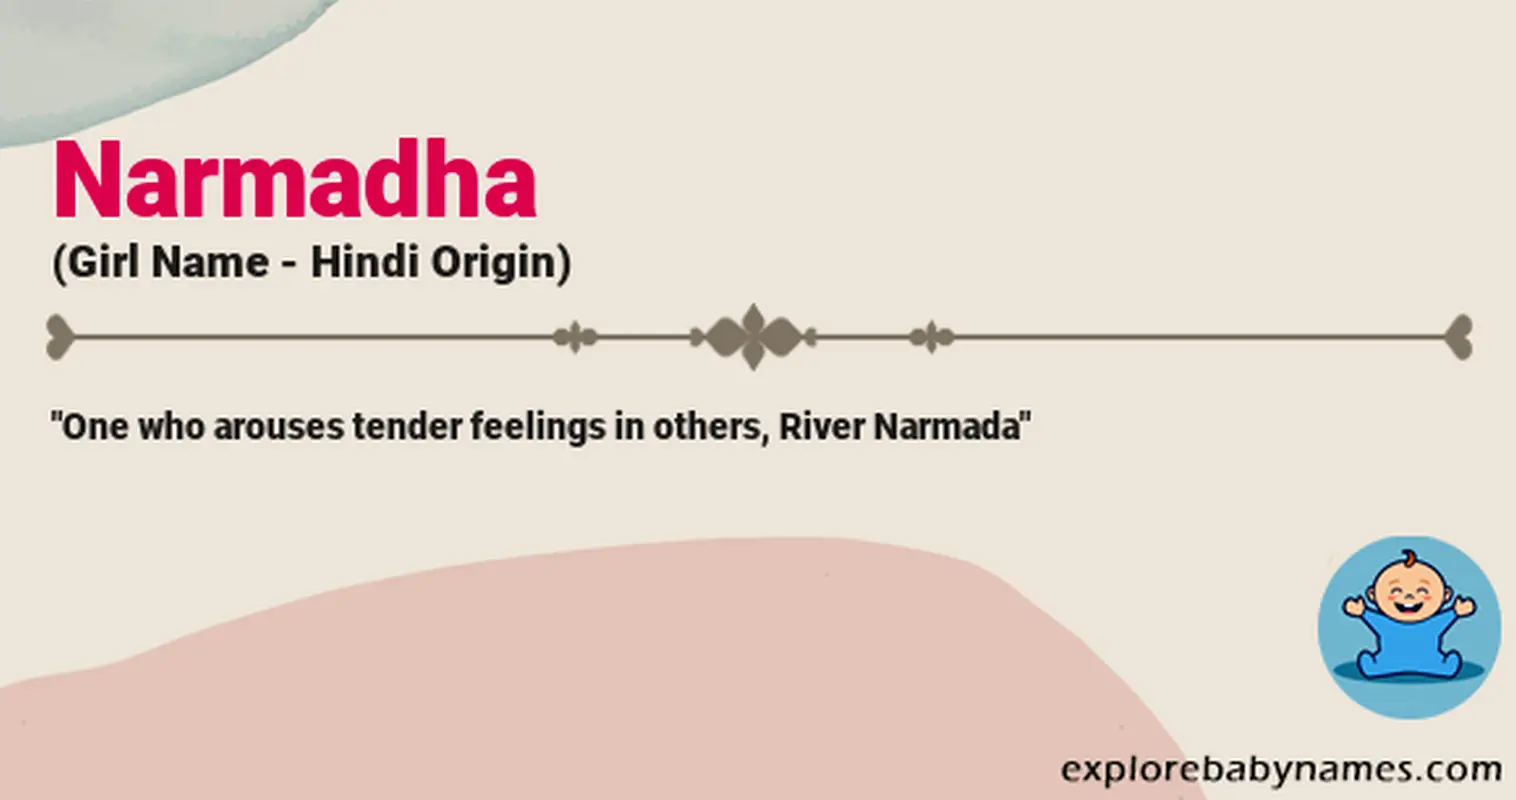 Meaning of Narmadha